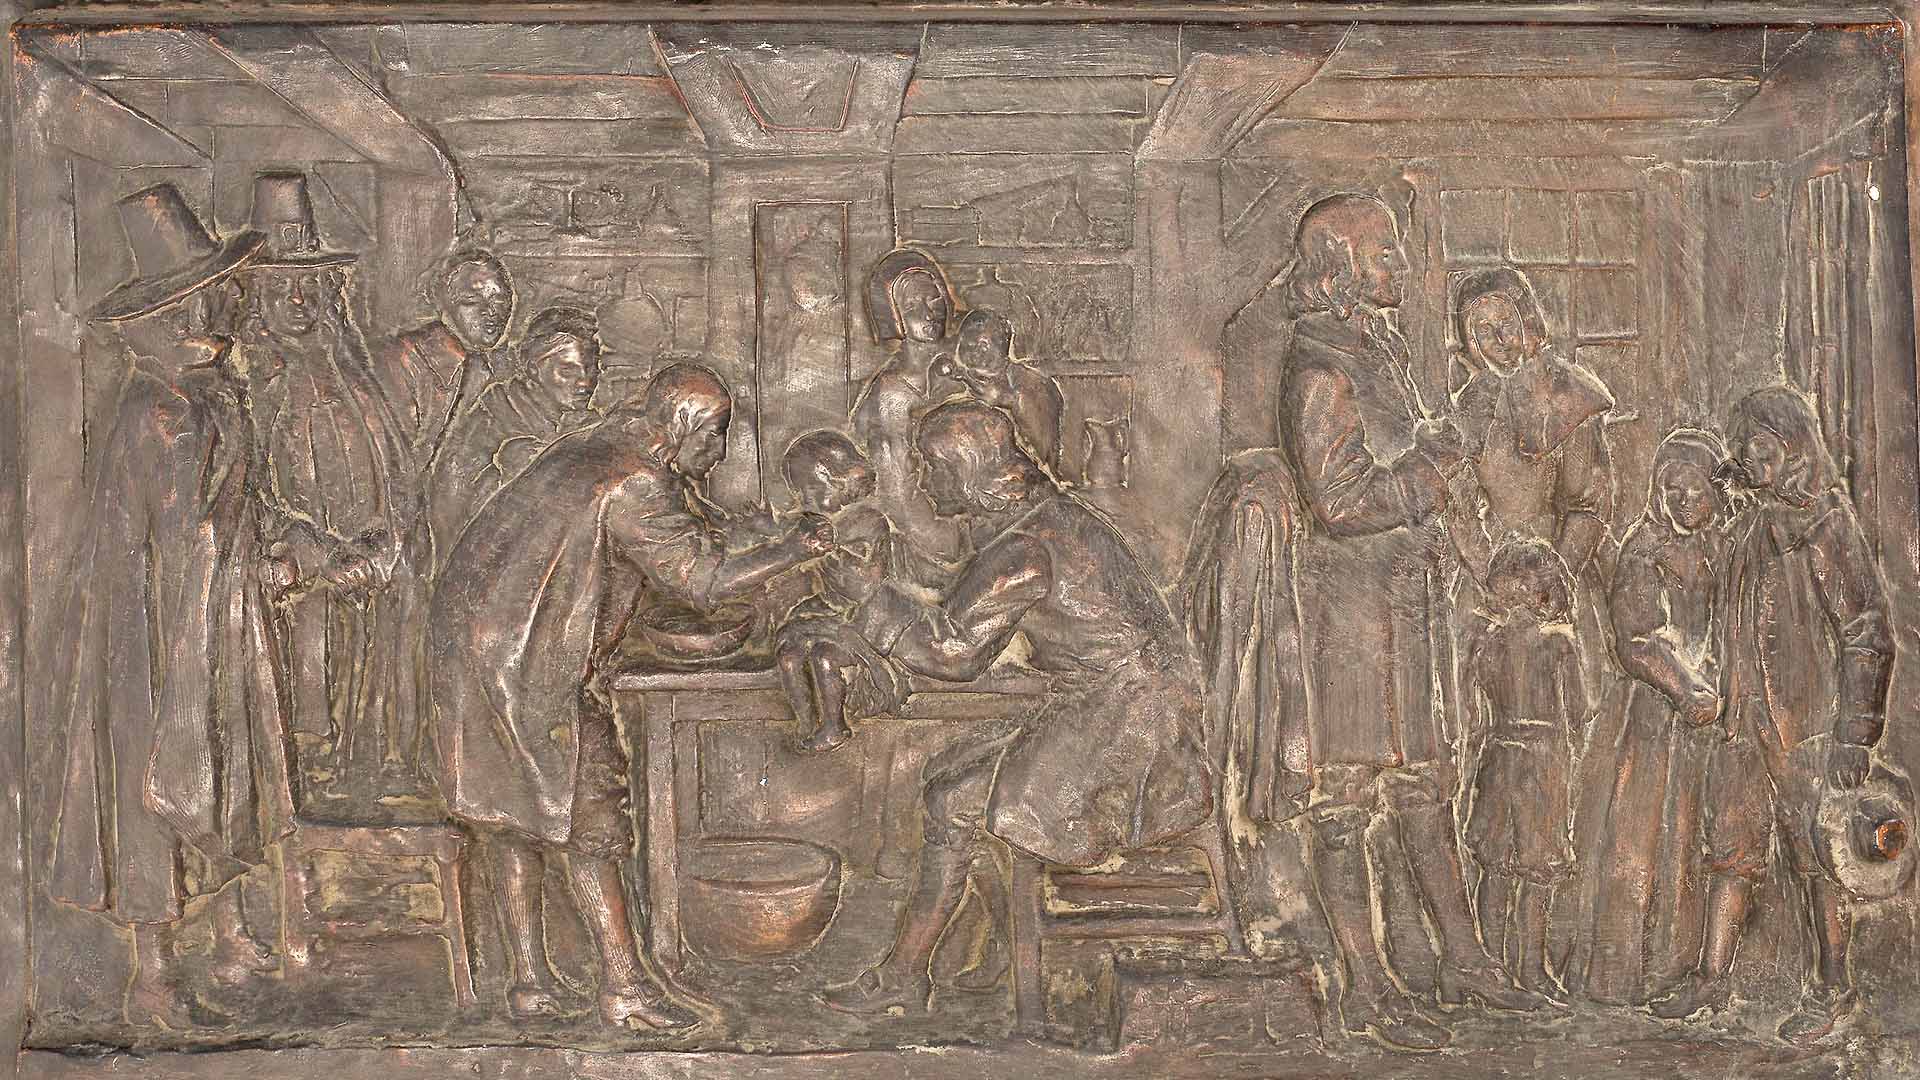 "Reverend Cotton Mather (son of Increase) using his powerful influence to overcome the prejudice against inoculation for smallpox in Boston, 1721," bronze